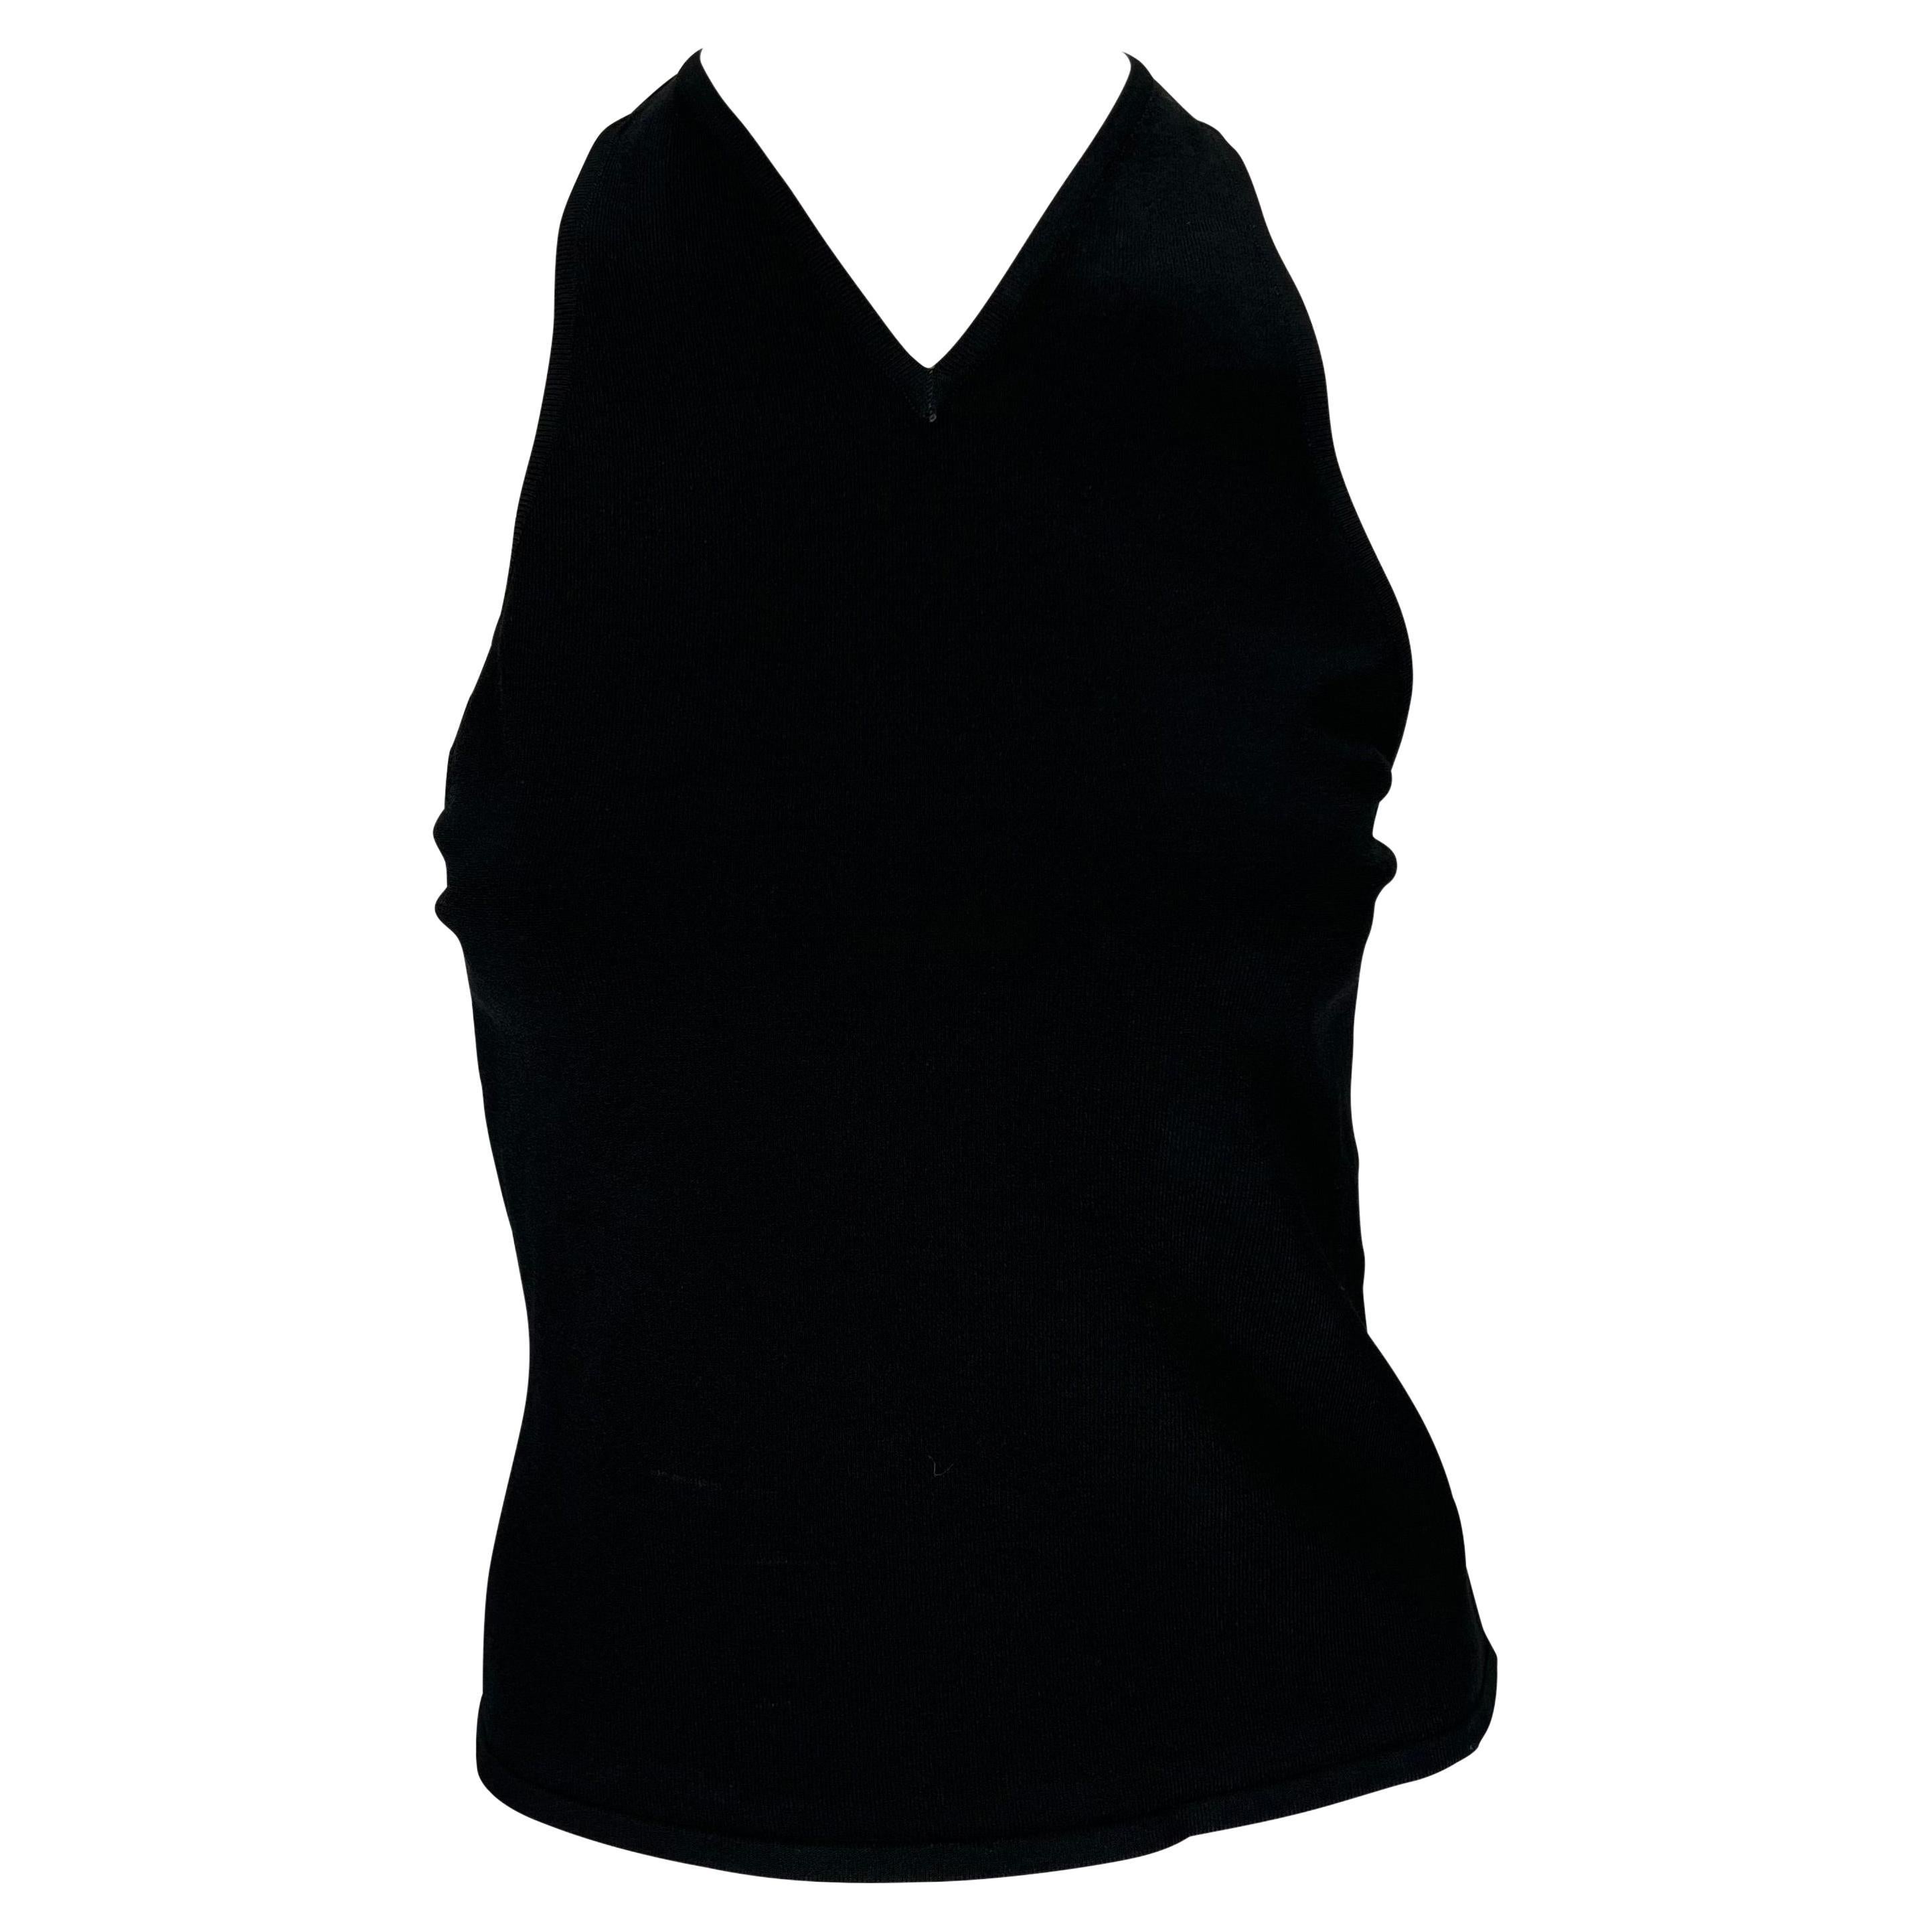 S/S 1998 Gucci by Tom Ford Black Stretch Knit Racerback Tank  For Sale 2